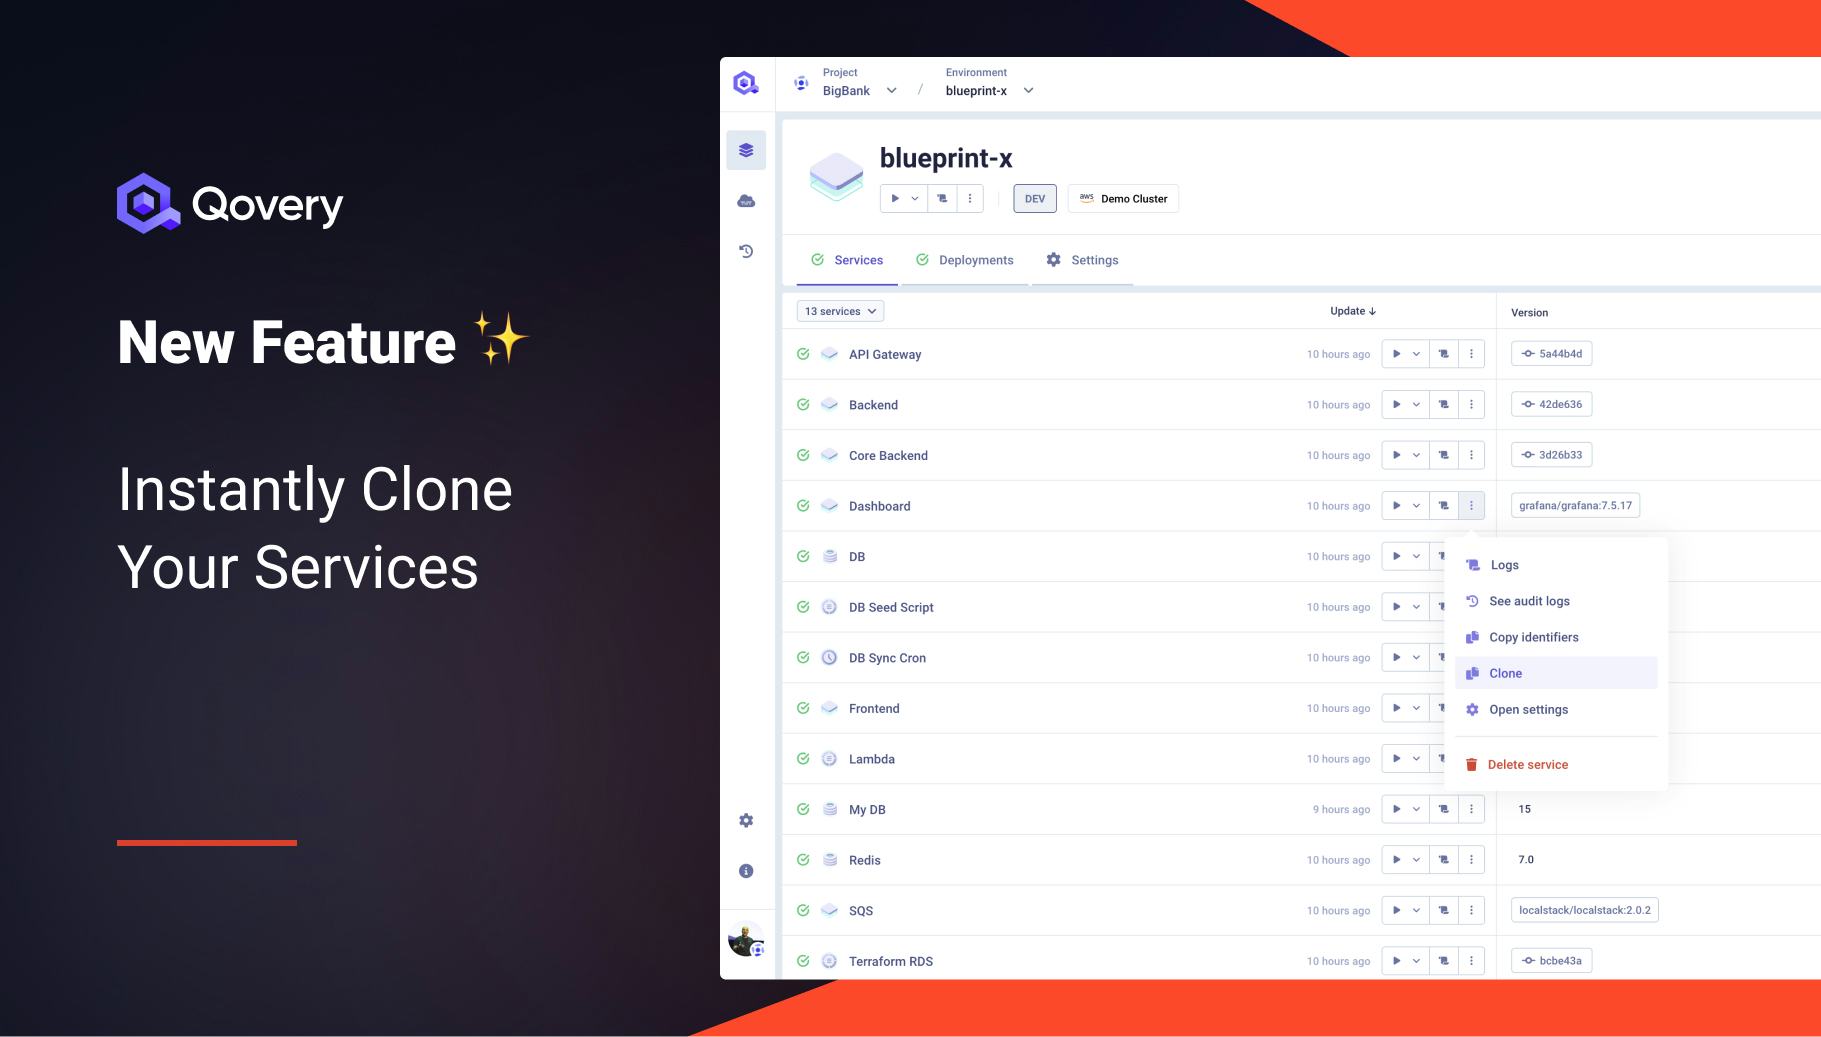 New Feature: Instantly Clone Your Service